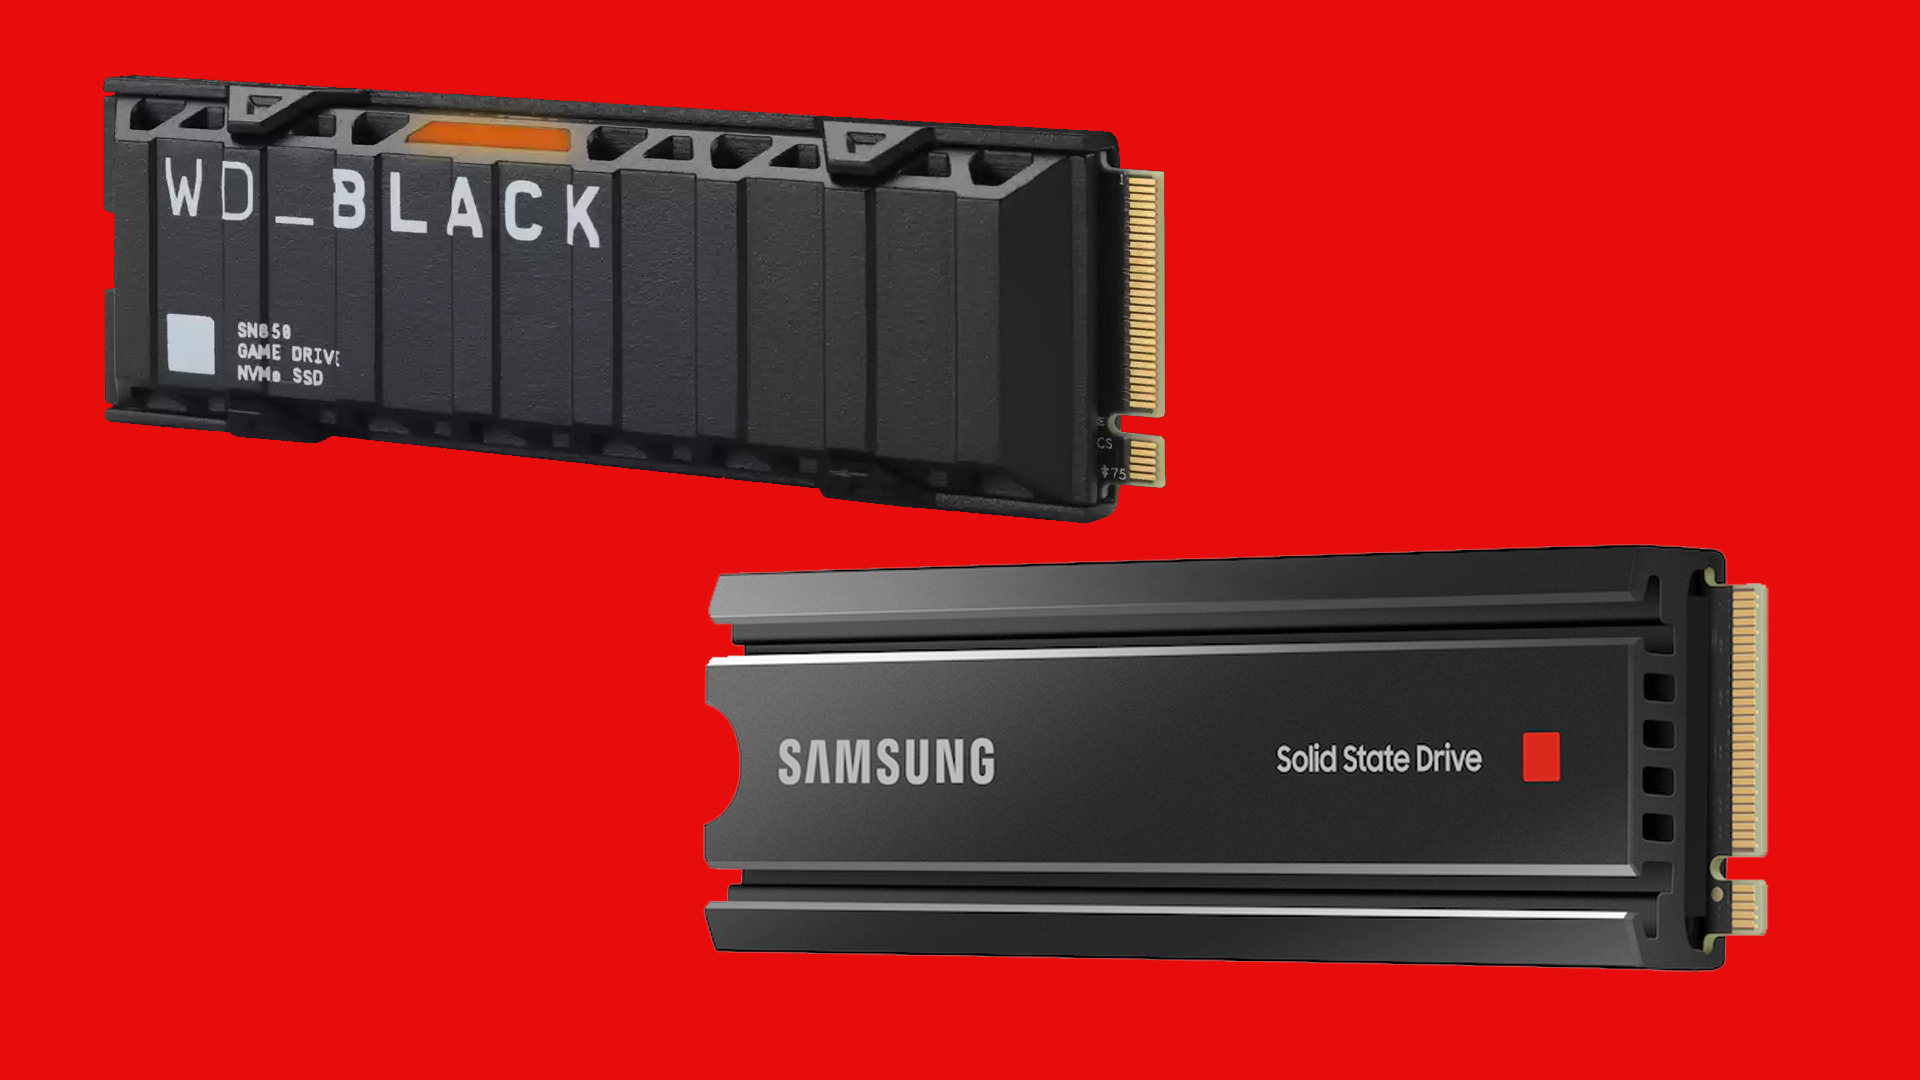 Wd Black Sn850 Vs Samsung Pro 980 Which Ps5 Ssd Should You Buy This Black Friday Gamesradar